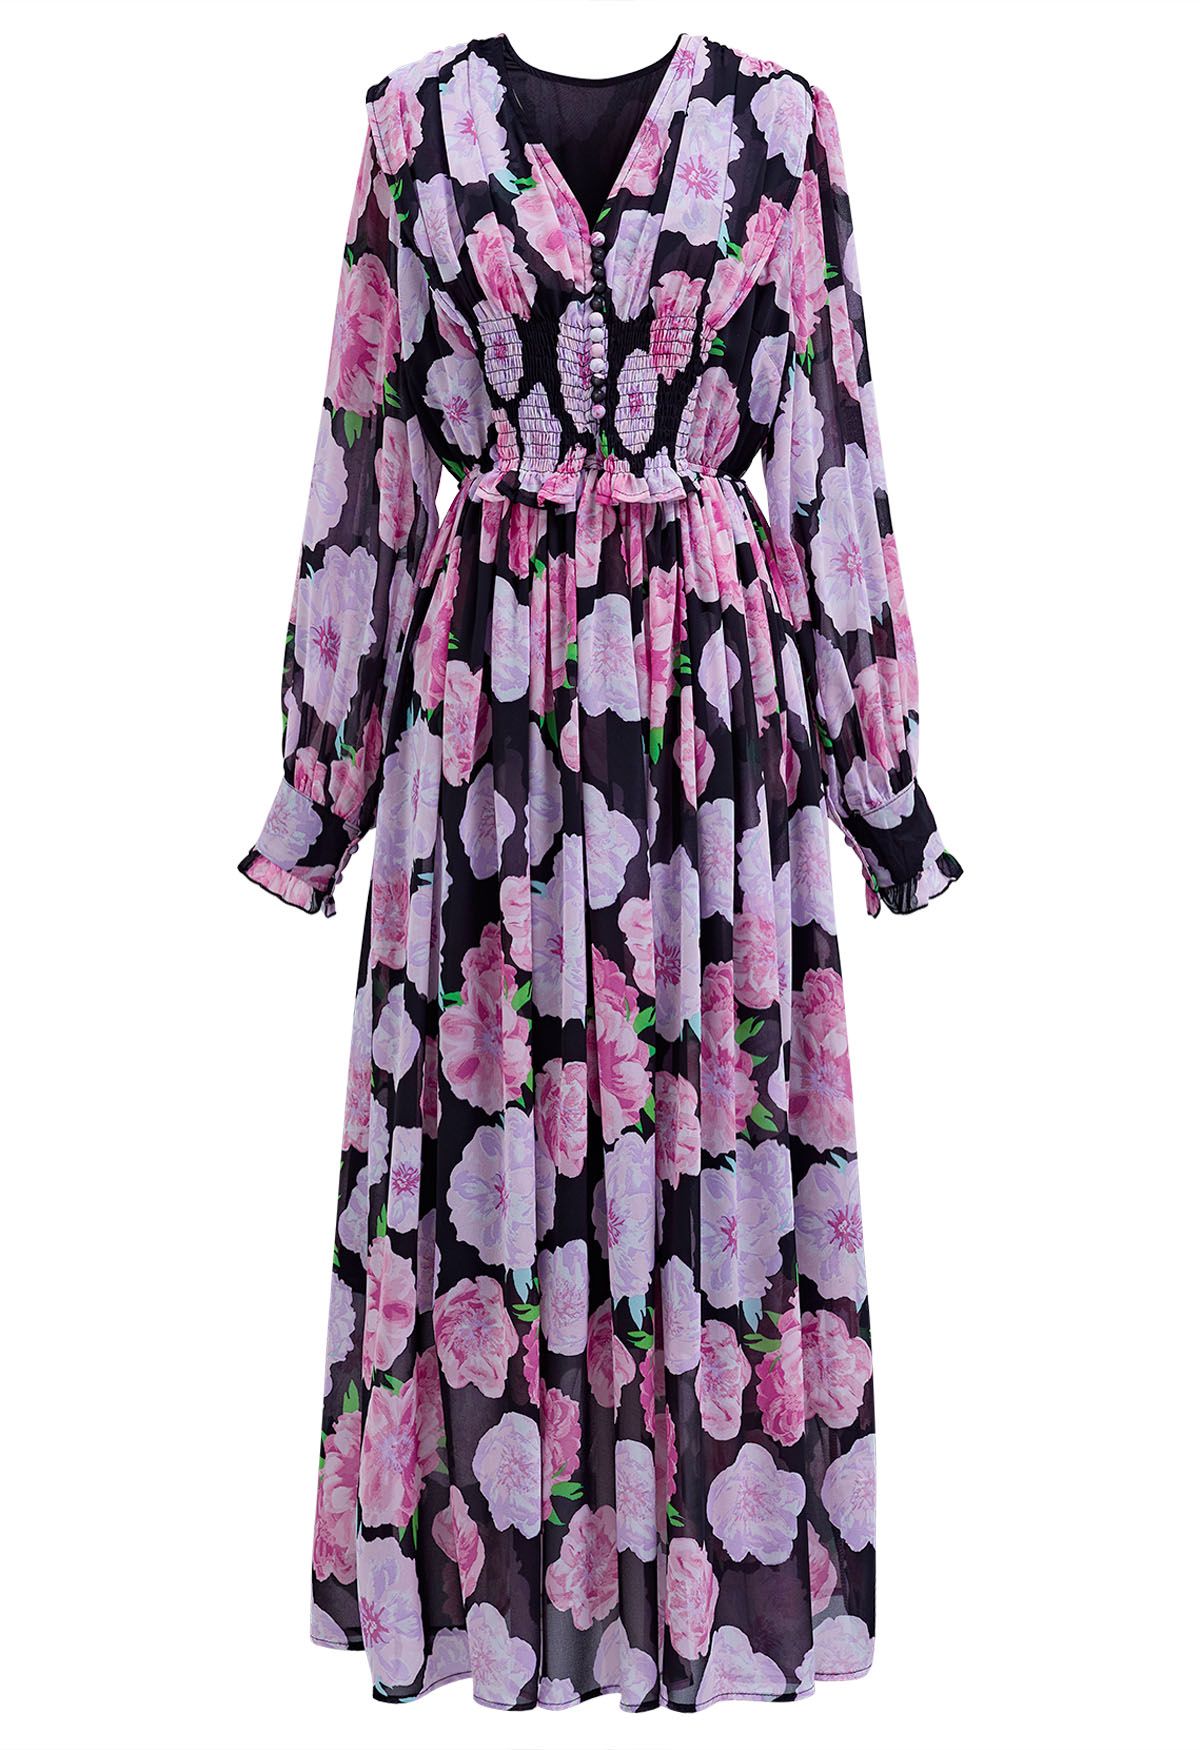 Delicate Floral Shirred Maxi Dress in Black